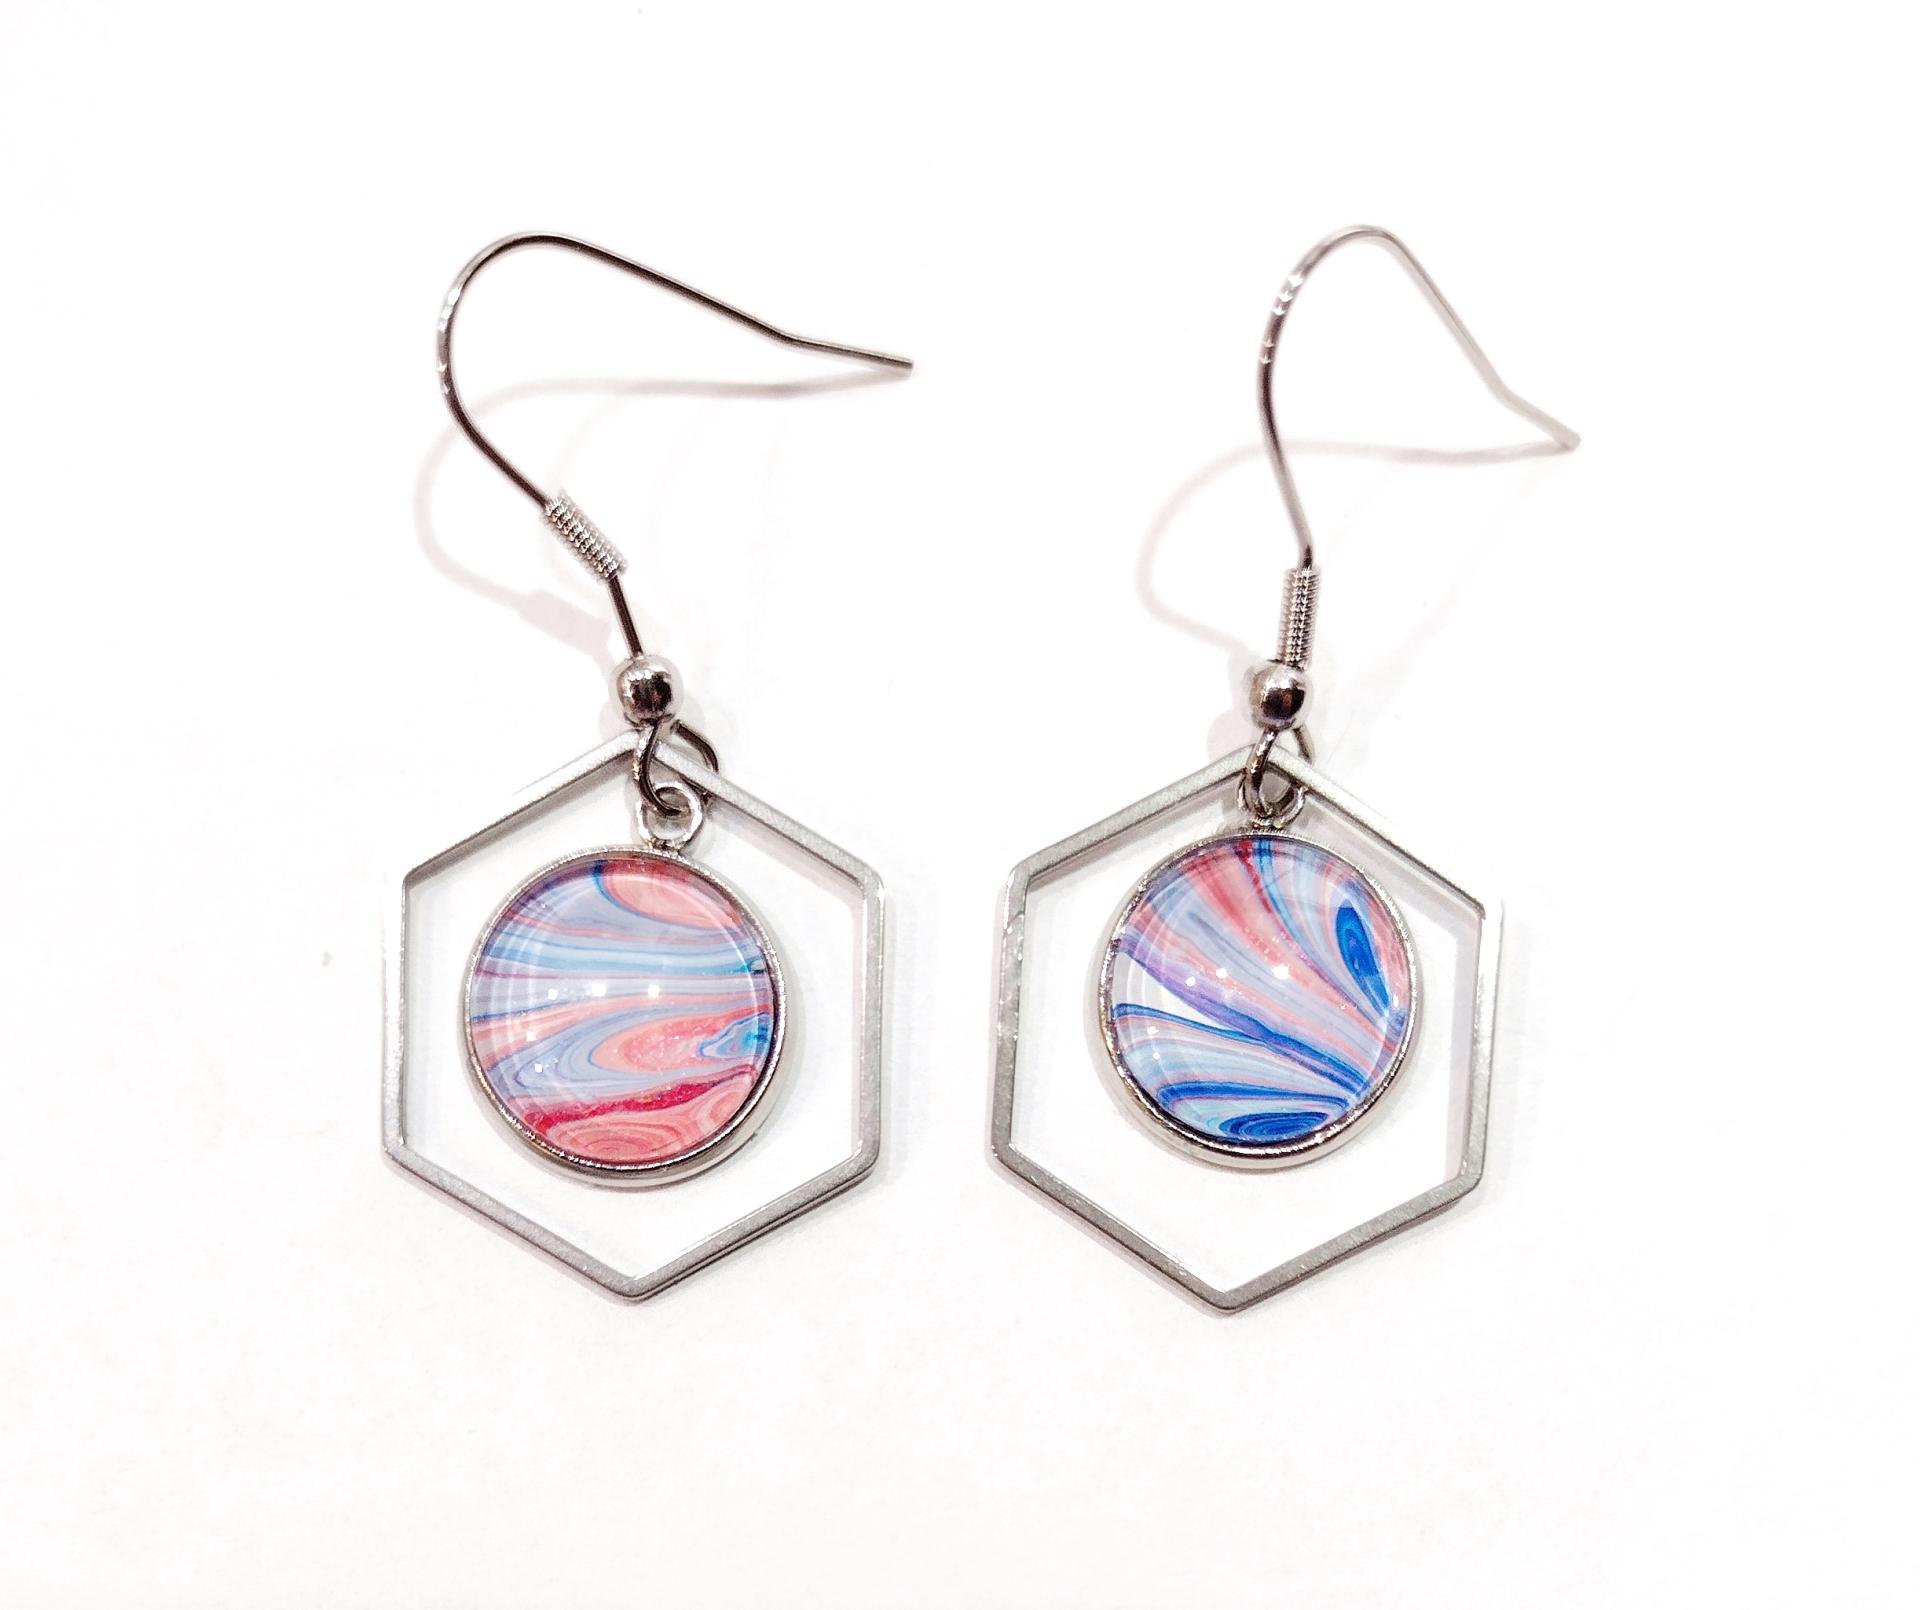 Painted Earrings, Pink and Blue Swirl Hexagon